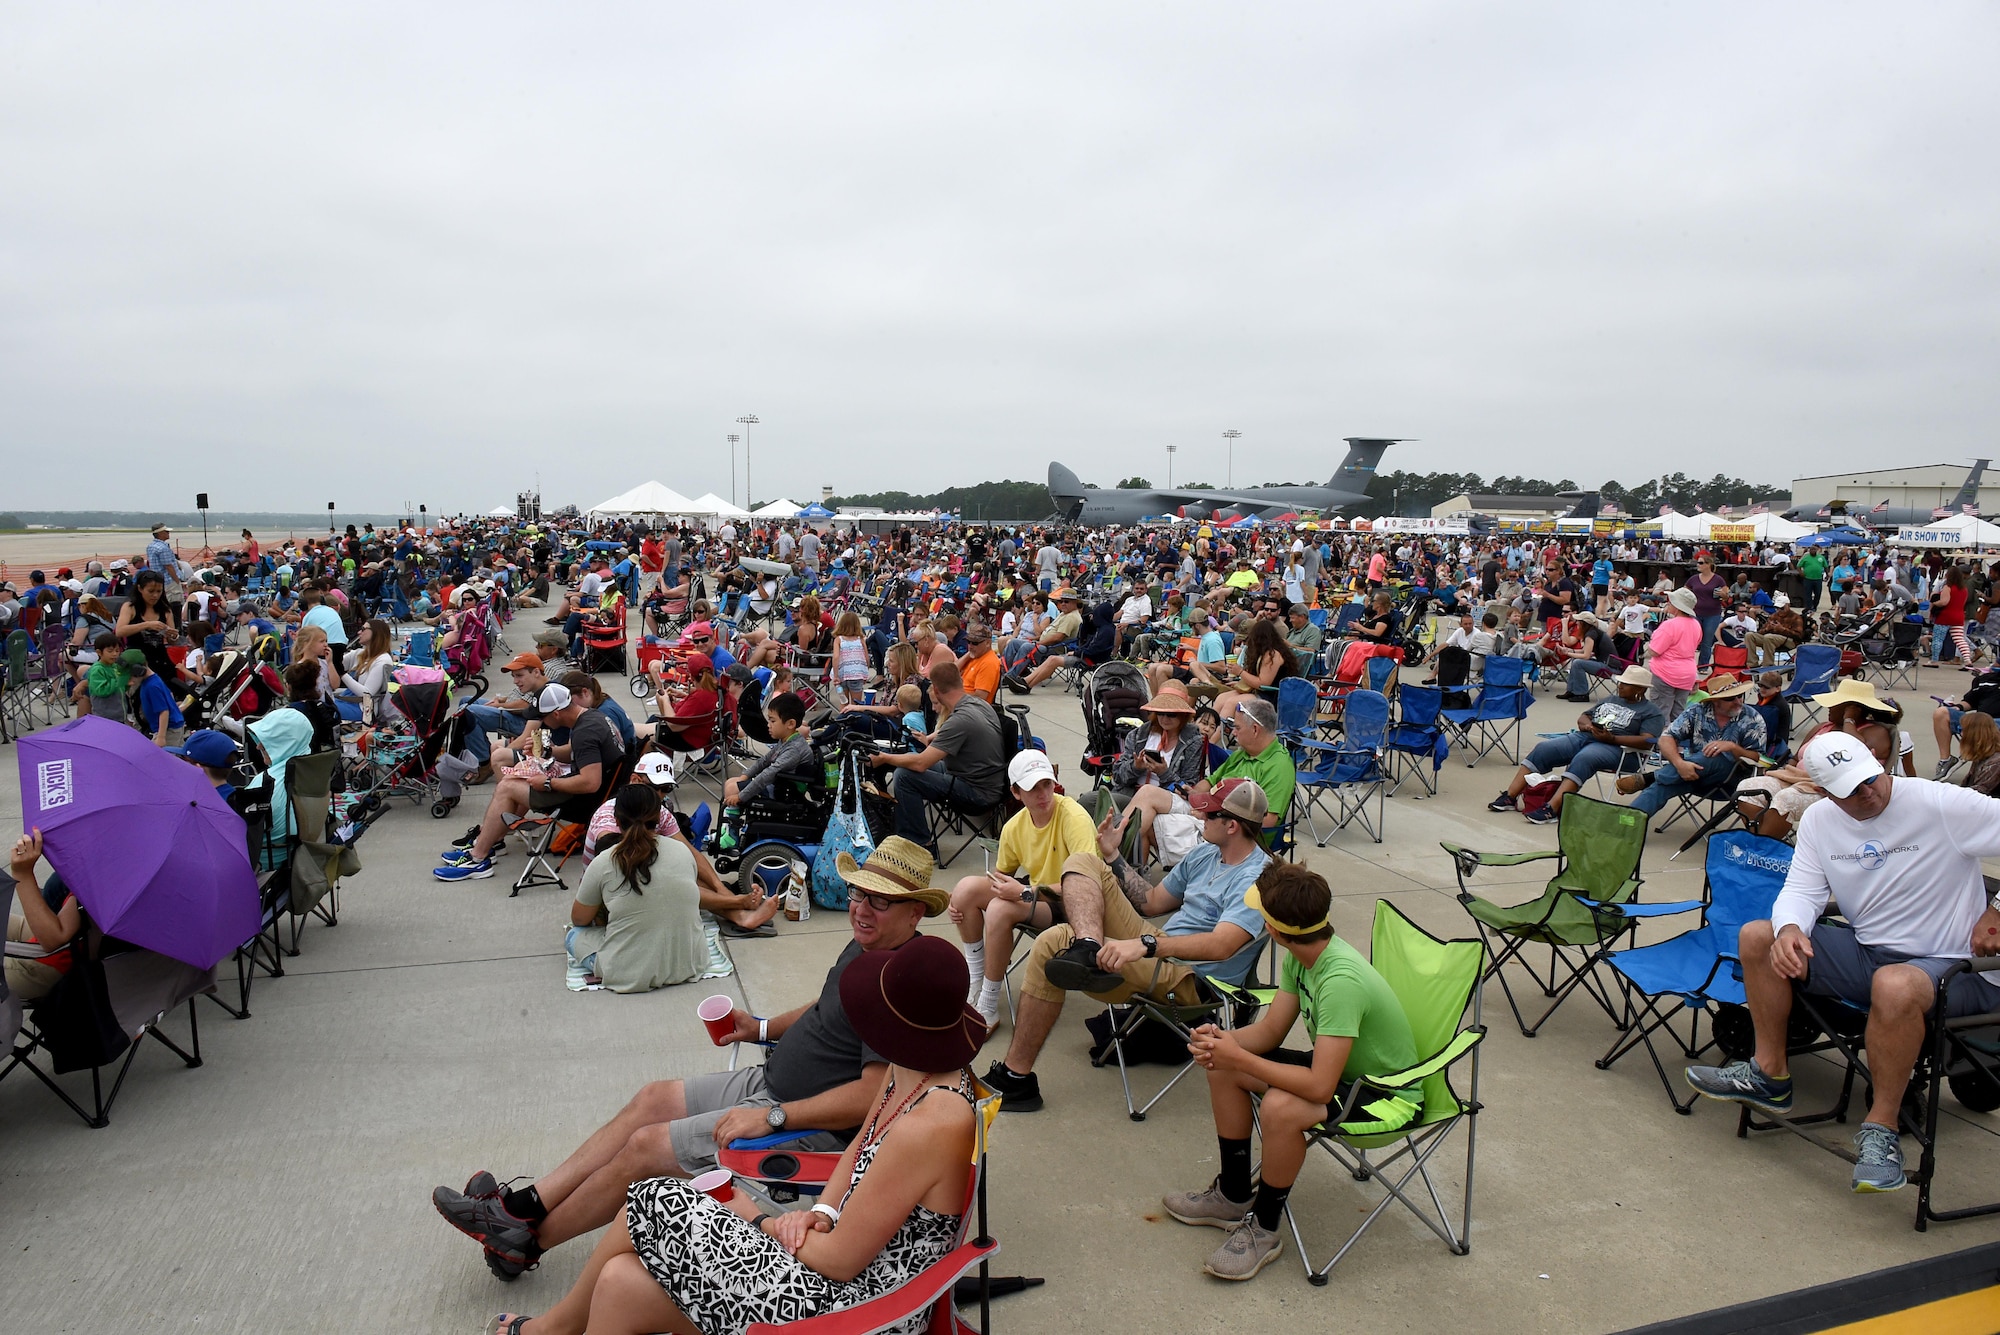 Spectators view multiple aircraft static displays and demonstrations during the Wings Over Wayne Air Show, May 21, 2017, at Seymour Johnson Air Force Base, North Carolina. The U.S. Navy’s premiere aerial demonstration team, the Blue Angels, headlined the free, two-day air show. (U.S. Air Force photo by Airman 1st Class Victoria Boyton)